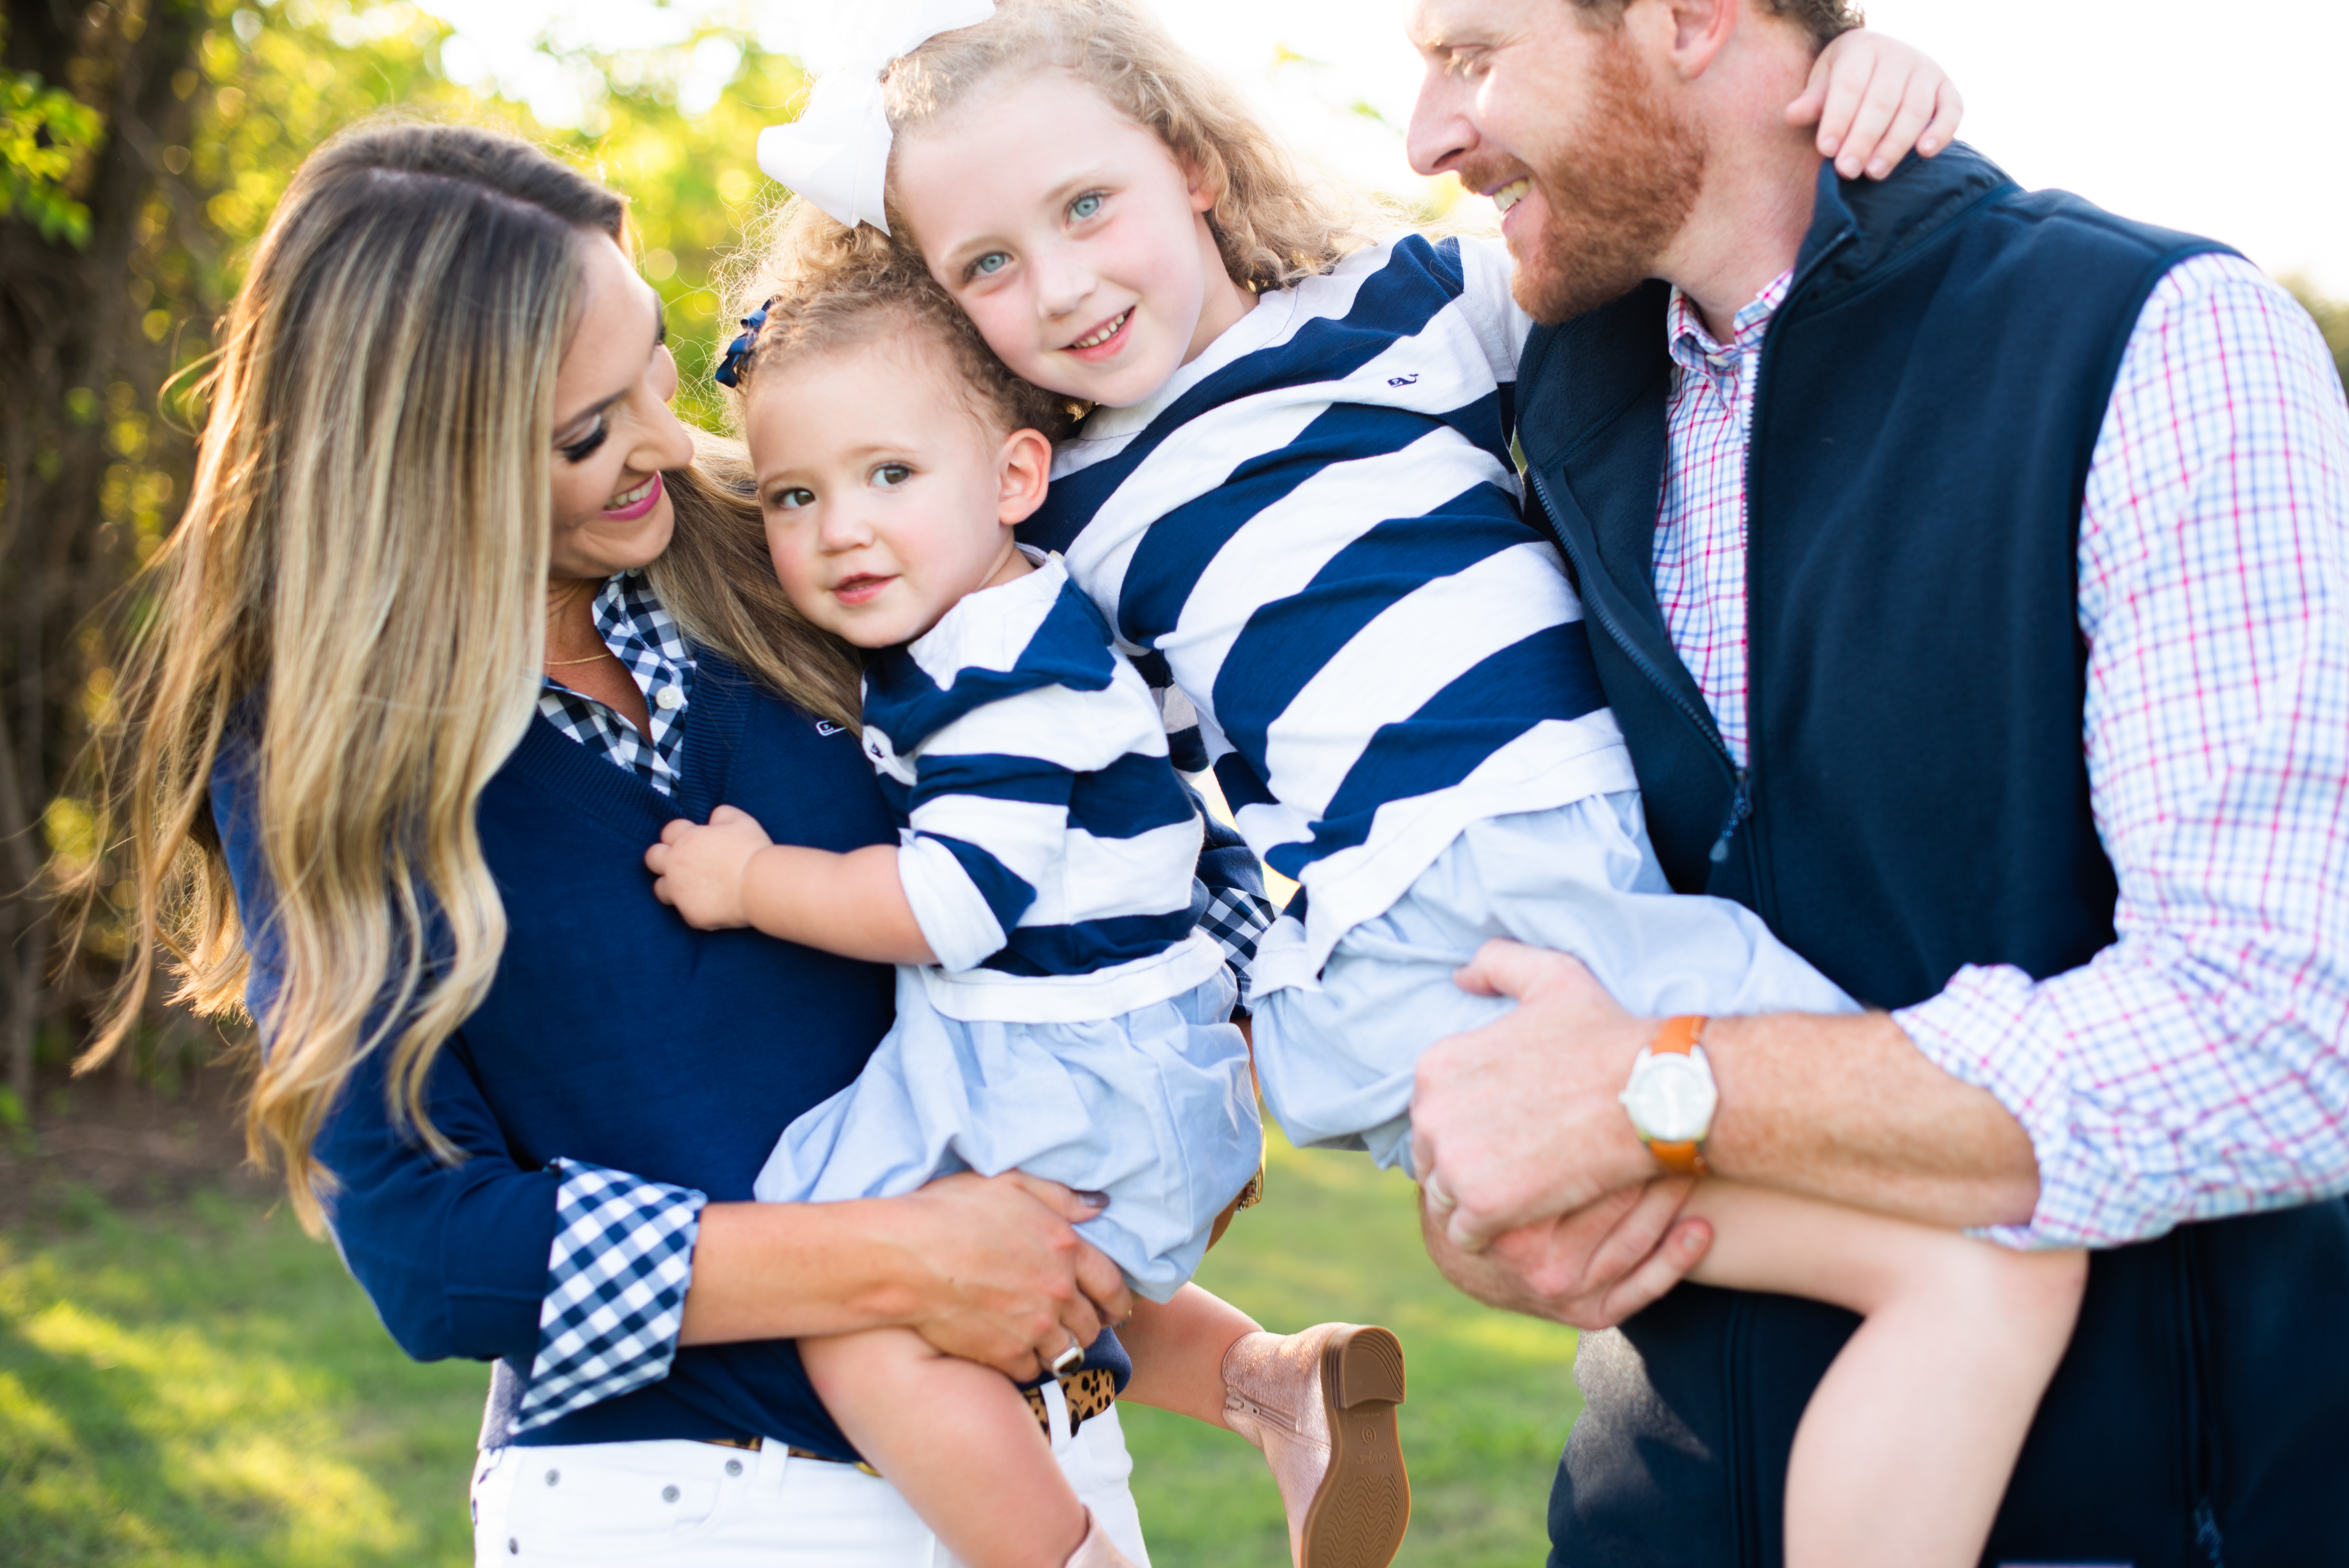 Vineyard Vines | What to Wear for Family Pictures this Fall | Tips, Tricks and Outfit Suggestions! featured by popular Dallas fashion blogger Style Your Senses